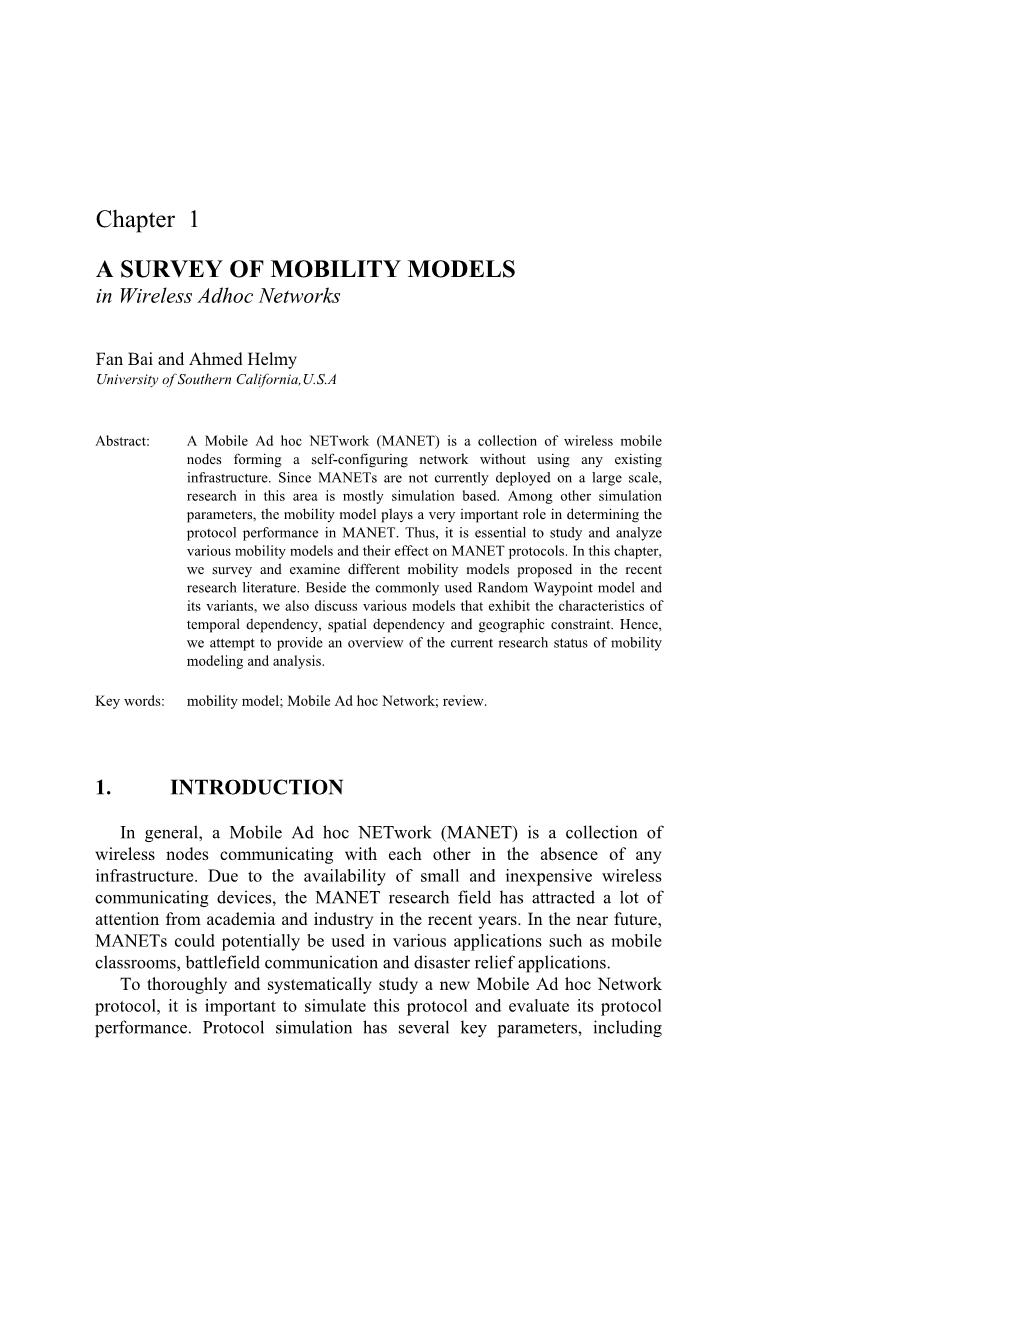 A SURVEY of MOBILITY MODELS in Wireless Adhoc Networks